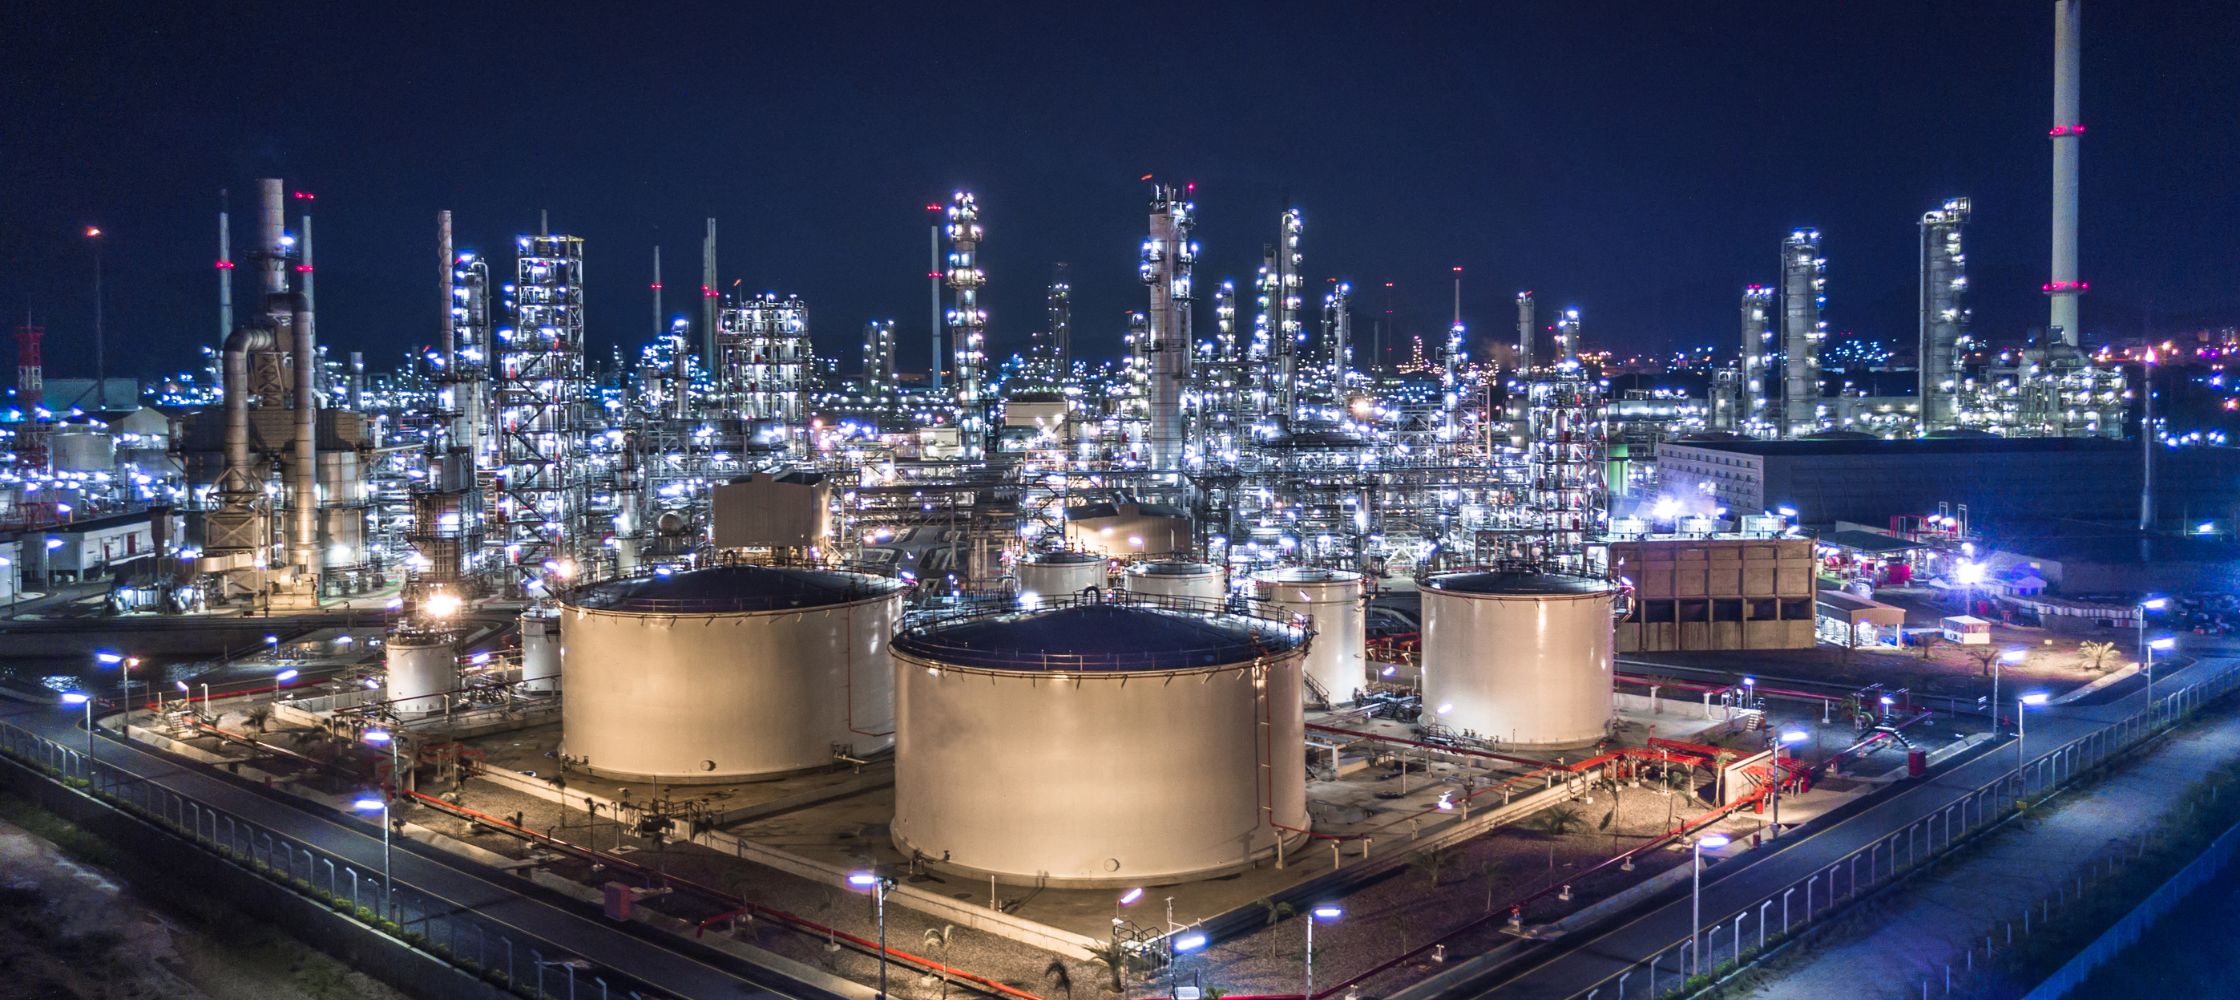 oil refinery in middle east